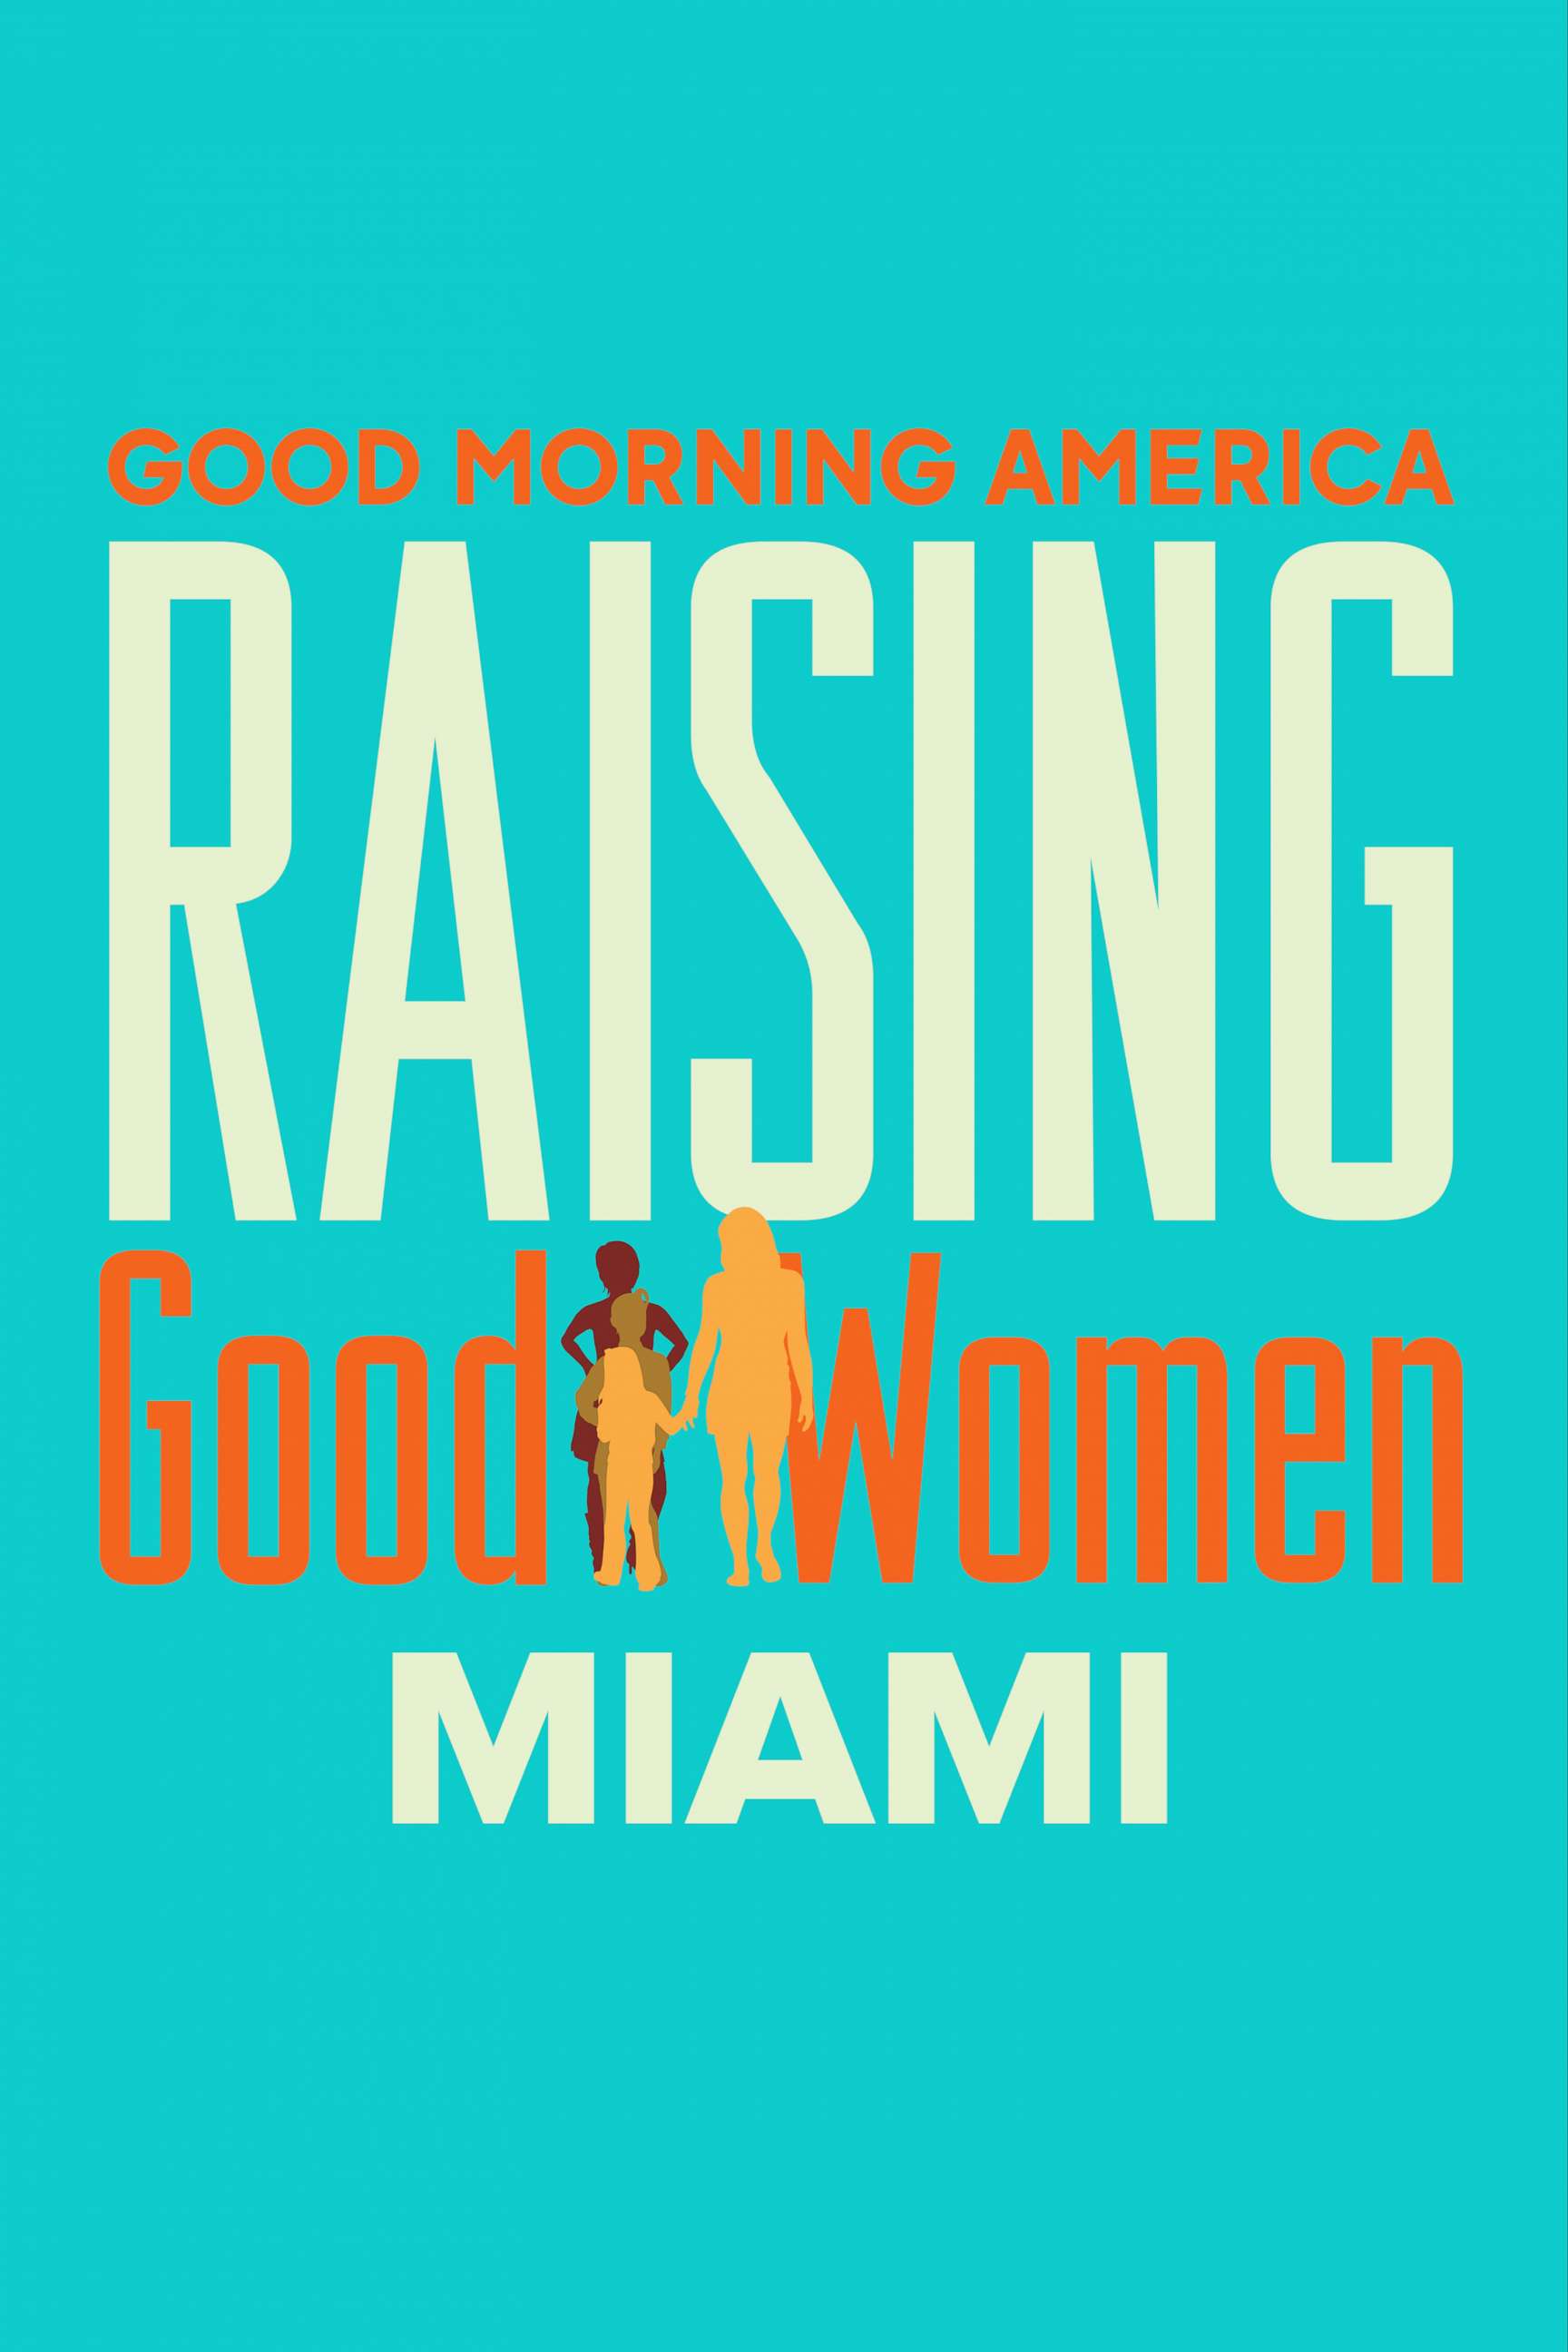 PHOTO:  "Good Morning America" sat down with three groups of girls and their parents from around the country for candid series called "Raising Good Women" about coming of age and how to empower strong women in the post "MeToo" era.